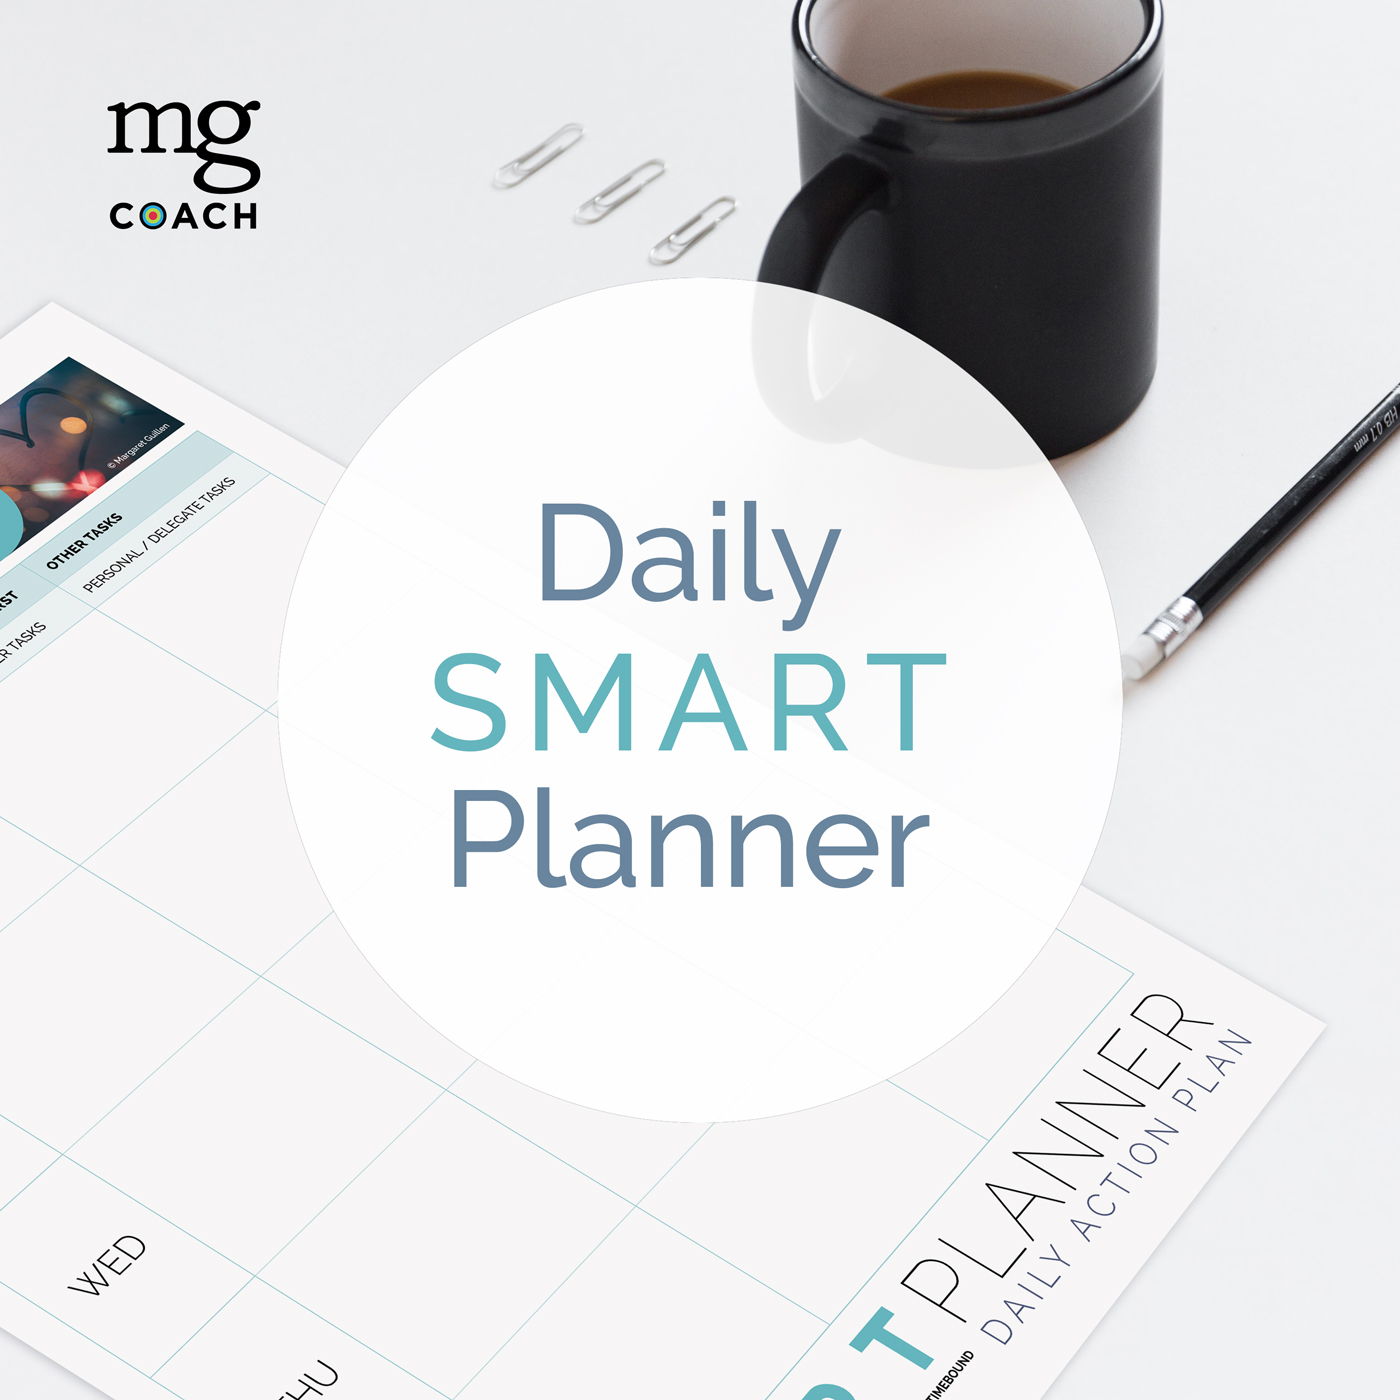 Daily SMART Planner